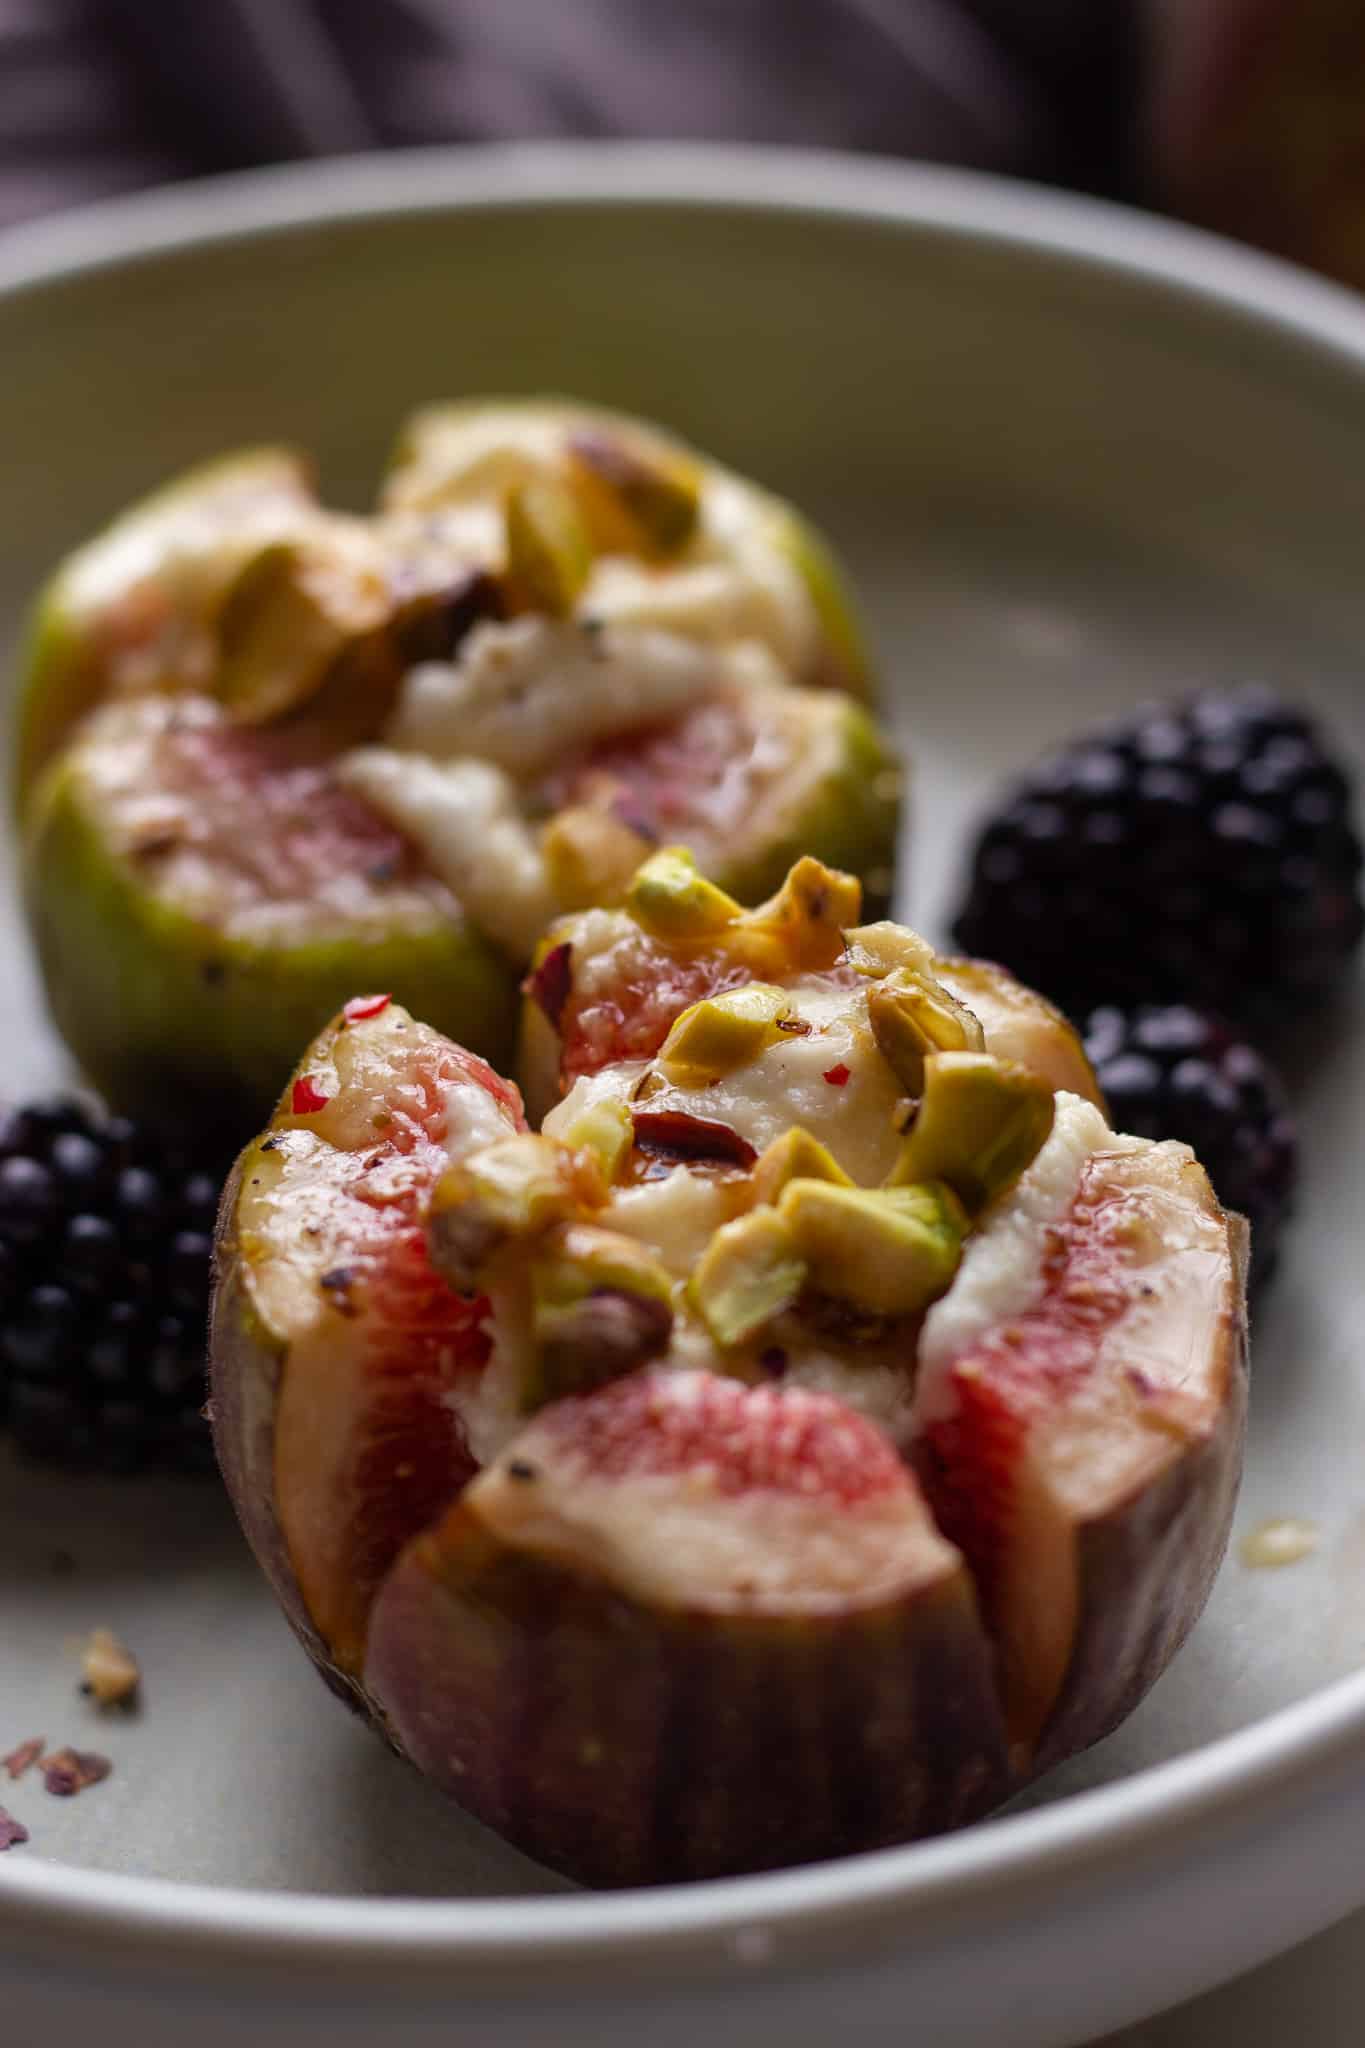 stuffed roasted figs with pistachios and honey served in a small plate with blackberries on the side.